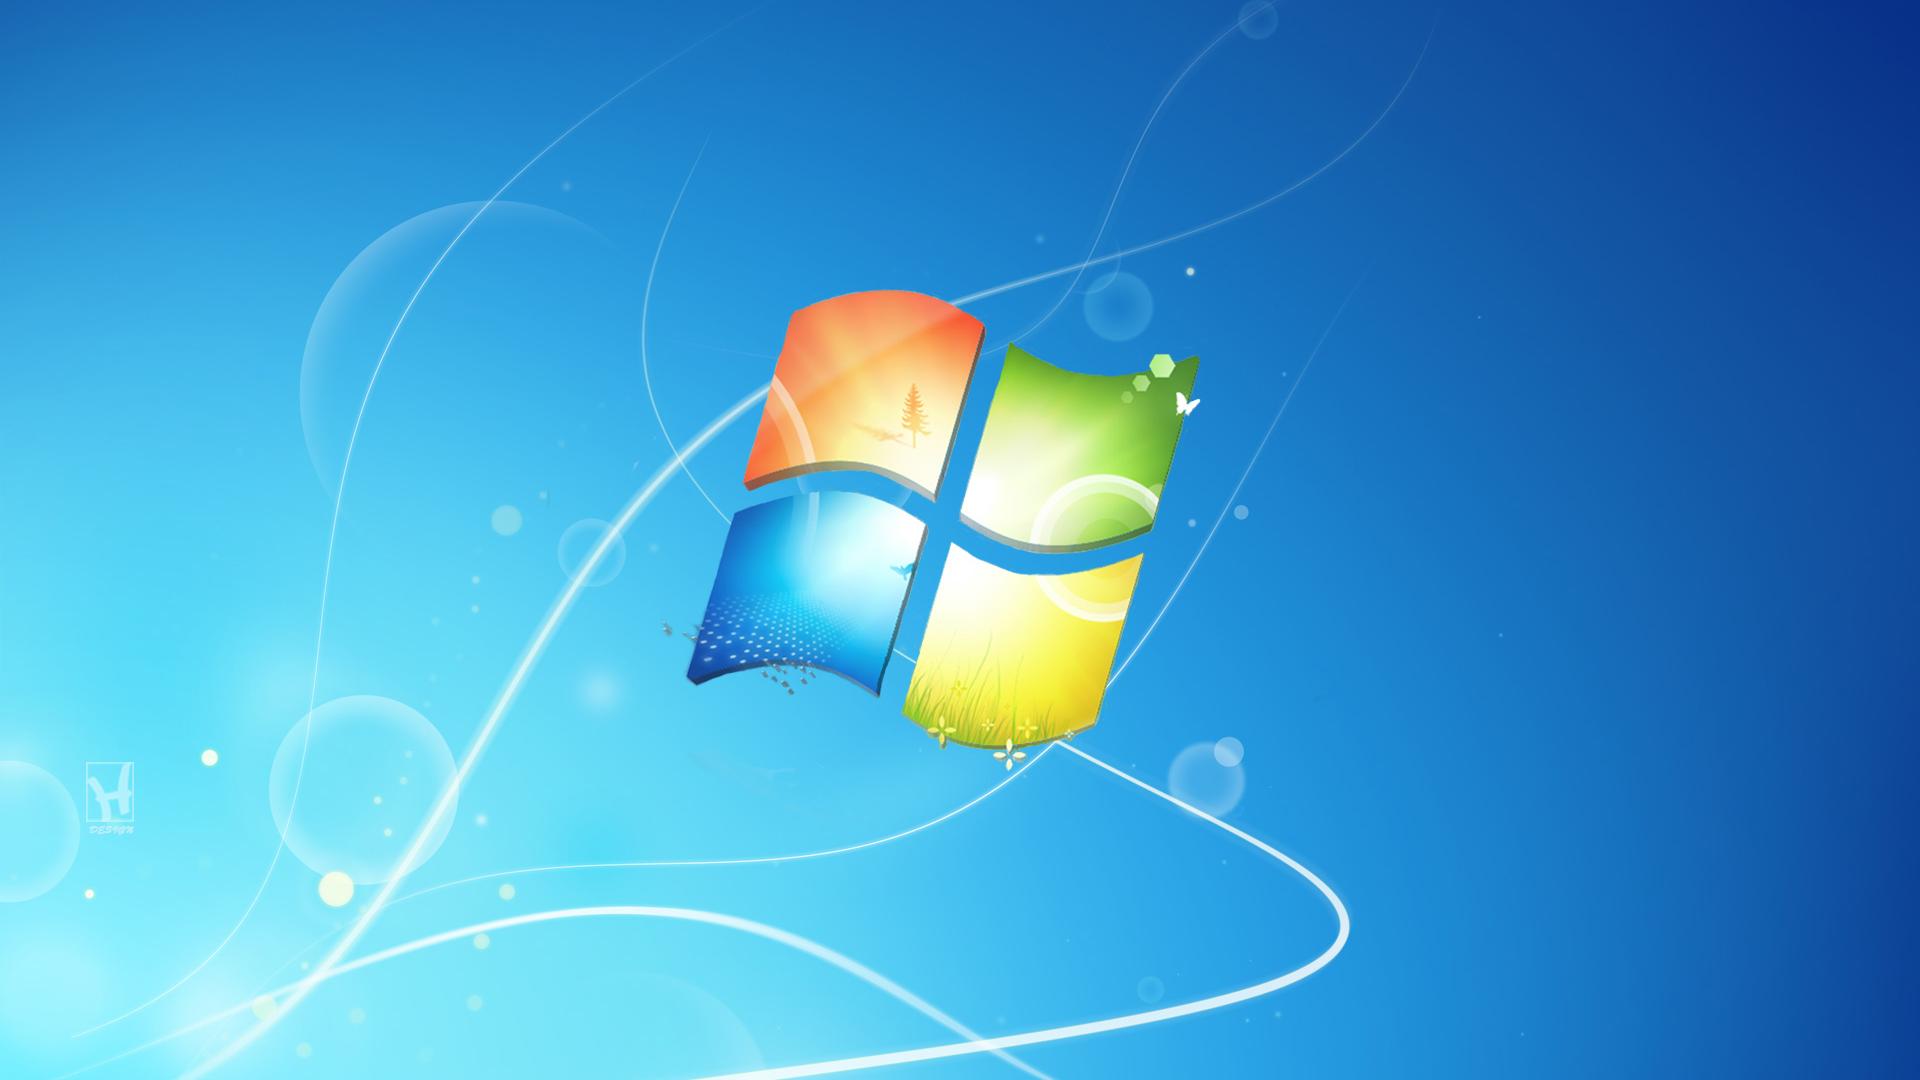 Cool wallpapers for windows 7